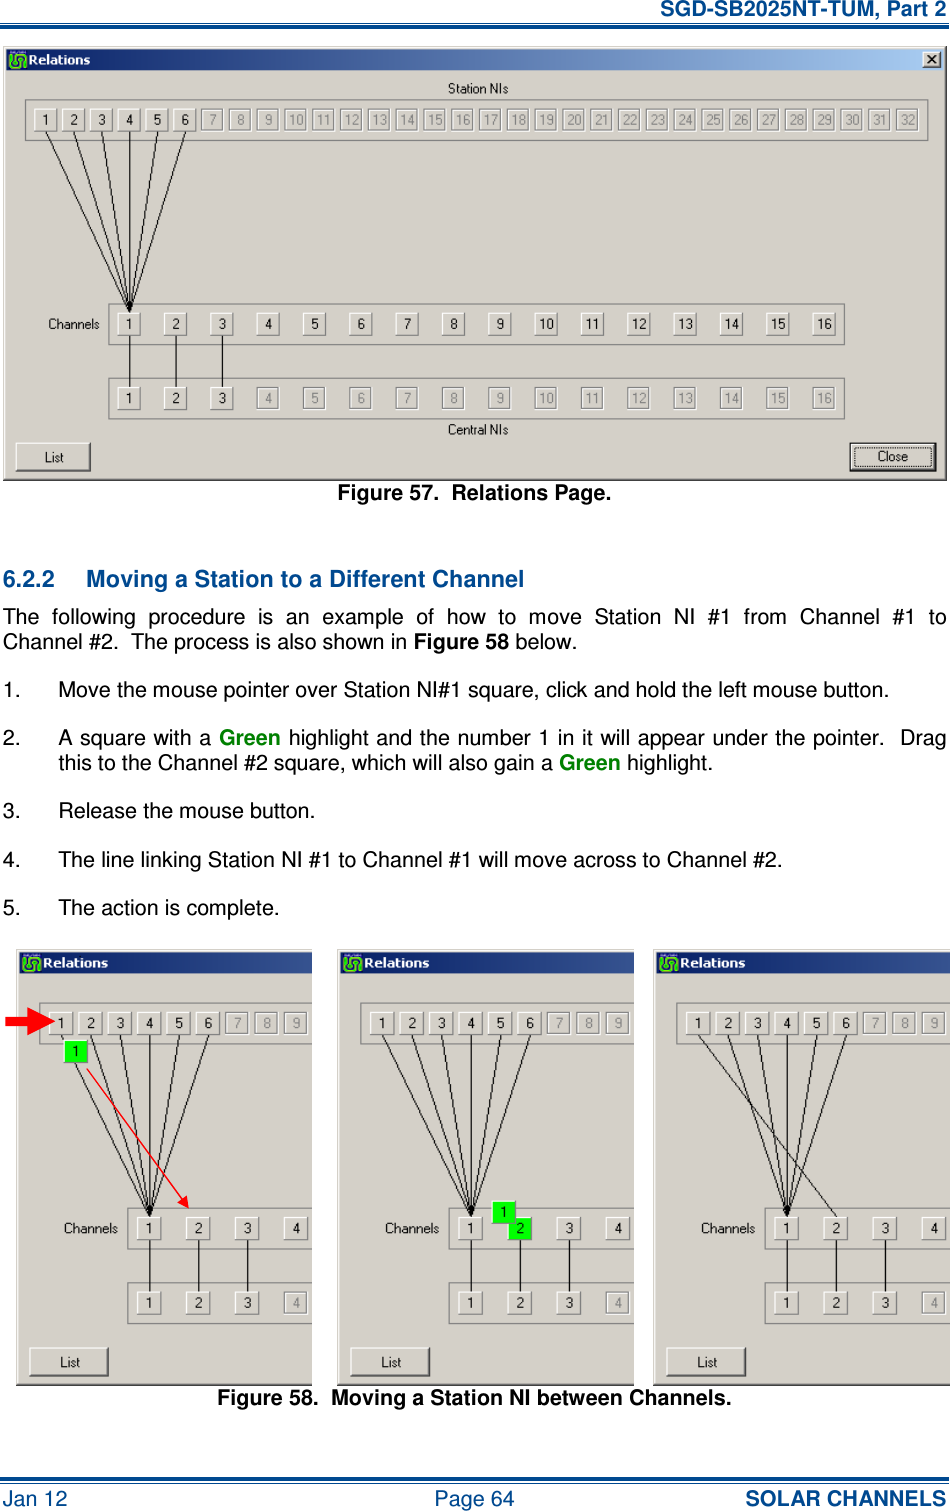   SGD-SB2025NT-TUM, Part 2 Jan 12  Page 64 SOLAR CHANNELS Figure 57.  Relations Page.  6.2.2  Moving a Station to a Different Channel The  following  procedure  is  an  example  of  how  to  move  Station  NI  #1  from  Channel  #1  to Channel #2.  The process is also shown in Figure 58 below. 1.  Move the mouse pointer over Station NI#1 square, click and hold the left mouse button. 2.  A square with a Green highlight and the number 1 in it will appear under the pointer.  Drag this to the Channel #2 square, which will also gain a Green highlight. 3.  Release the mouse button. 4.  The line linking Station NI #1 to Channel #1 will move across to Channel #2. 5.  The action is complete. Figure 58.  Moving a Station NI between Channels.  